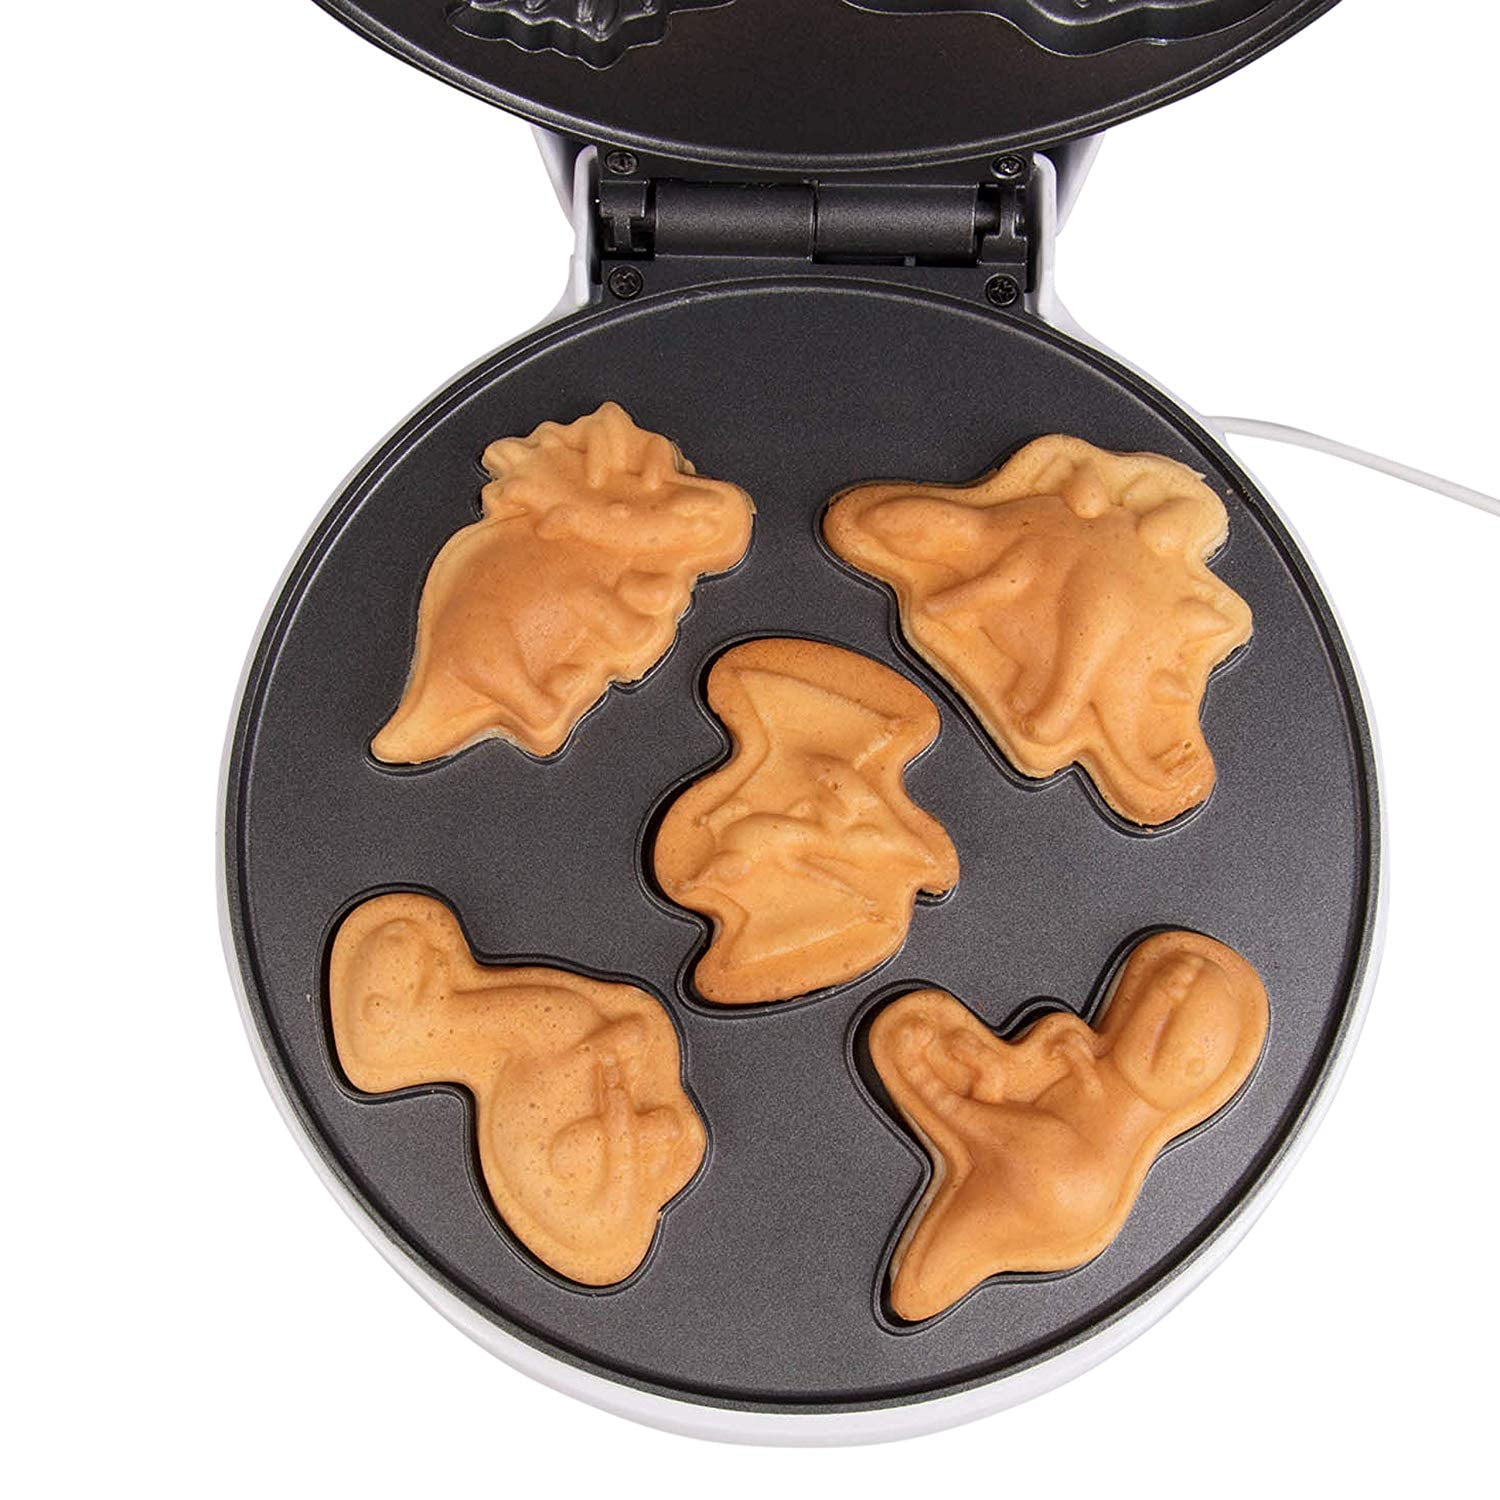 Make Breakfast Fun and Cool for Kids and Adults with Novelty Pancakes Electric Non-Stick Waffler Iron 5 Different Shaped Dinos in Minutes Dinosaur Mini Waffle Maker 